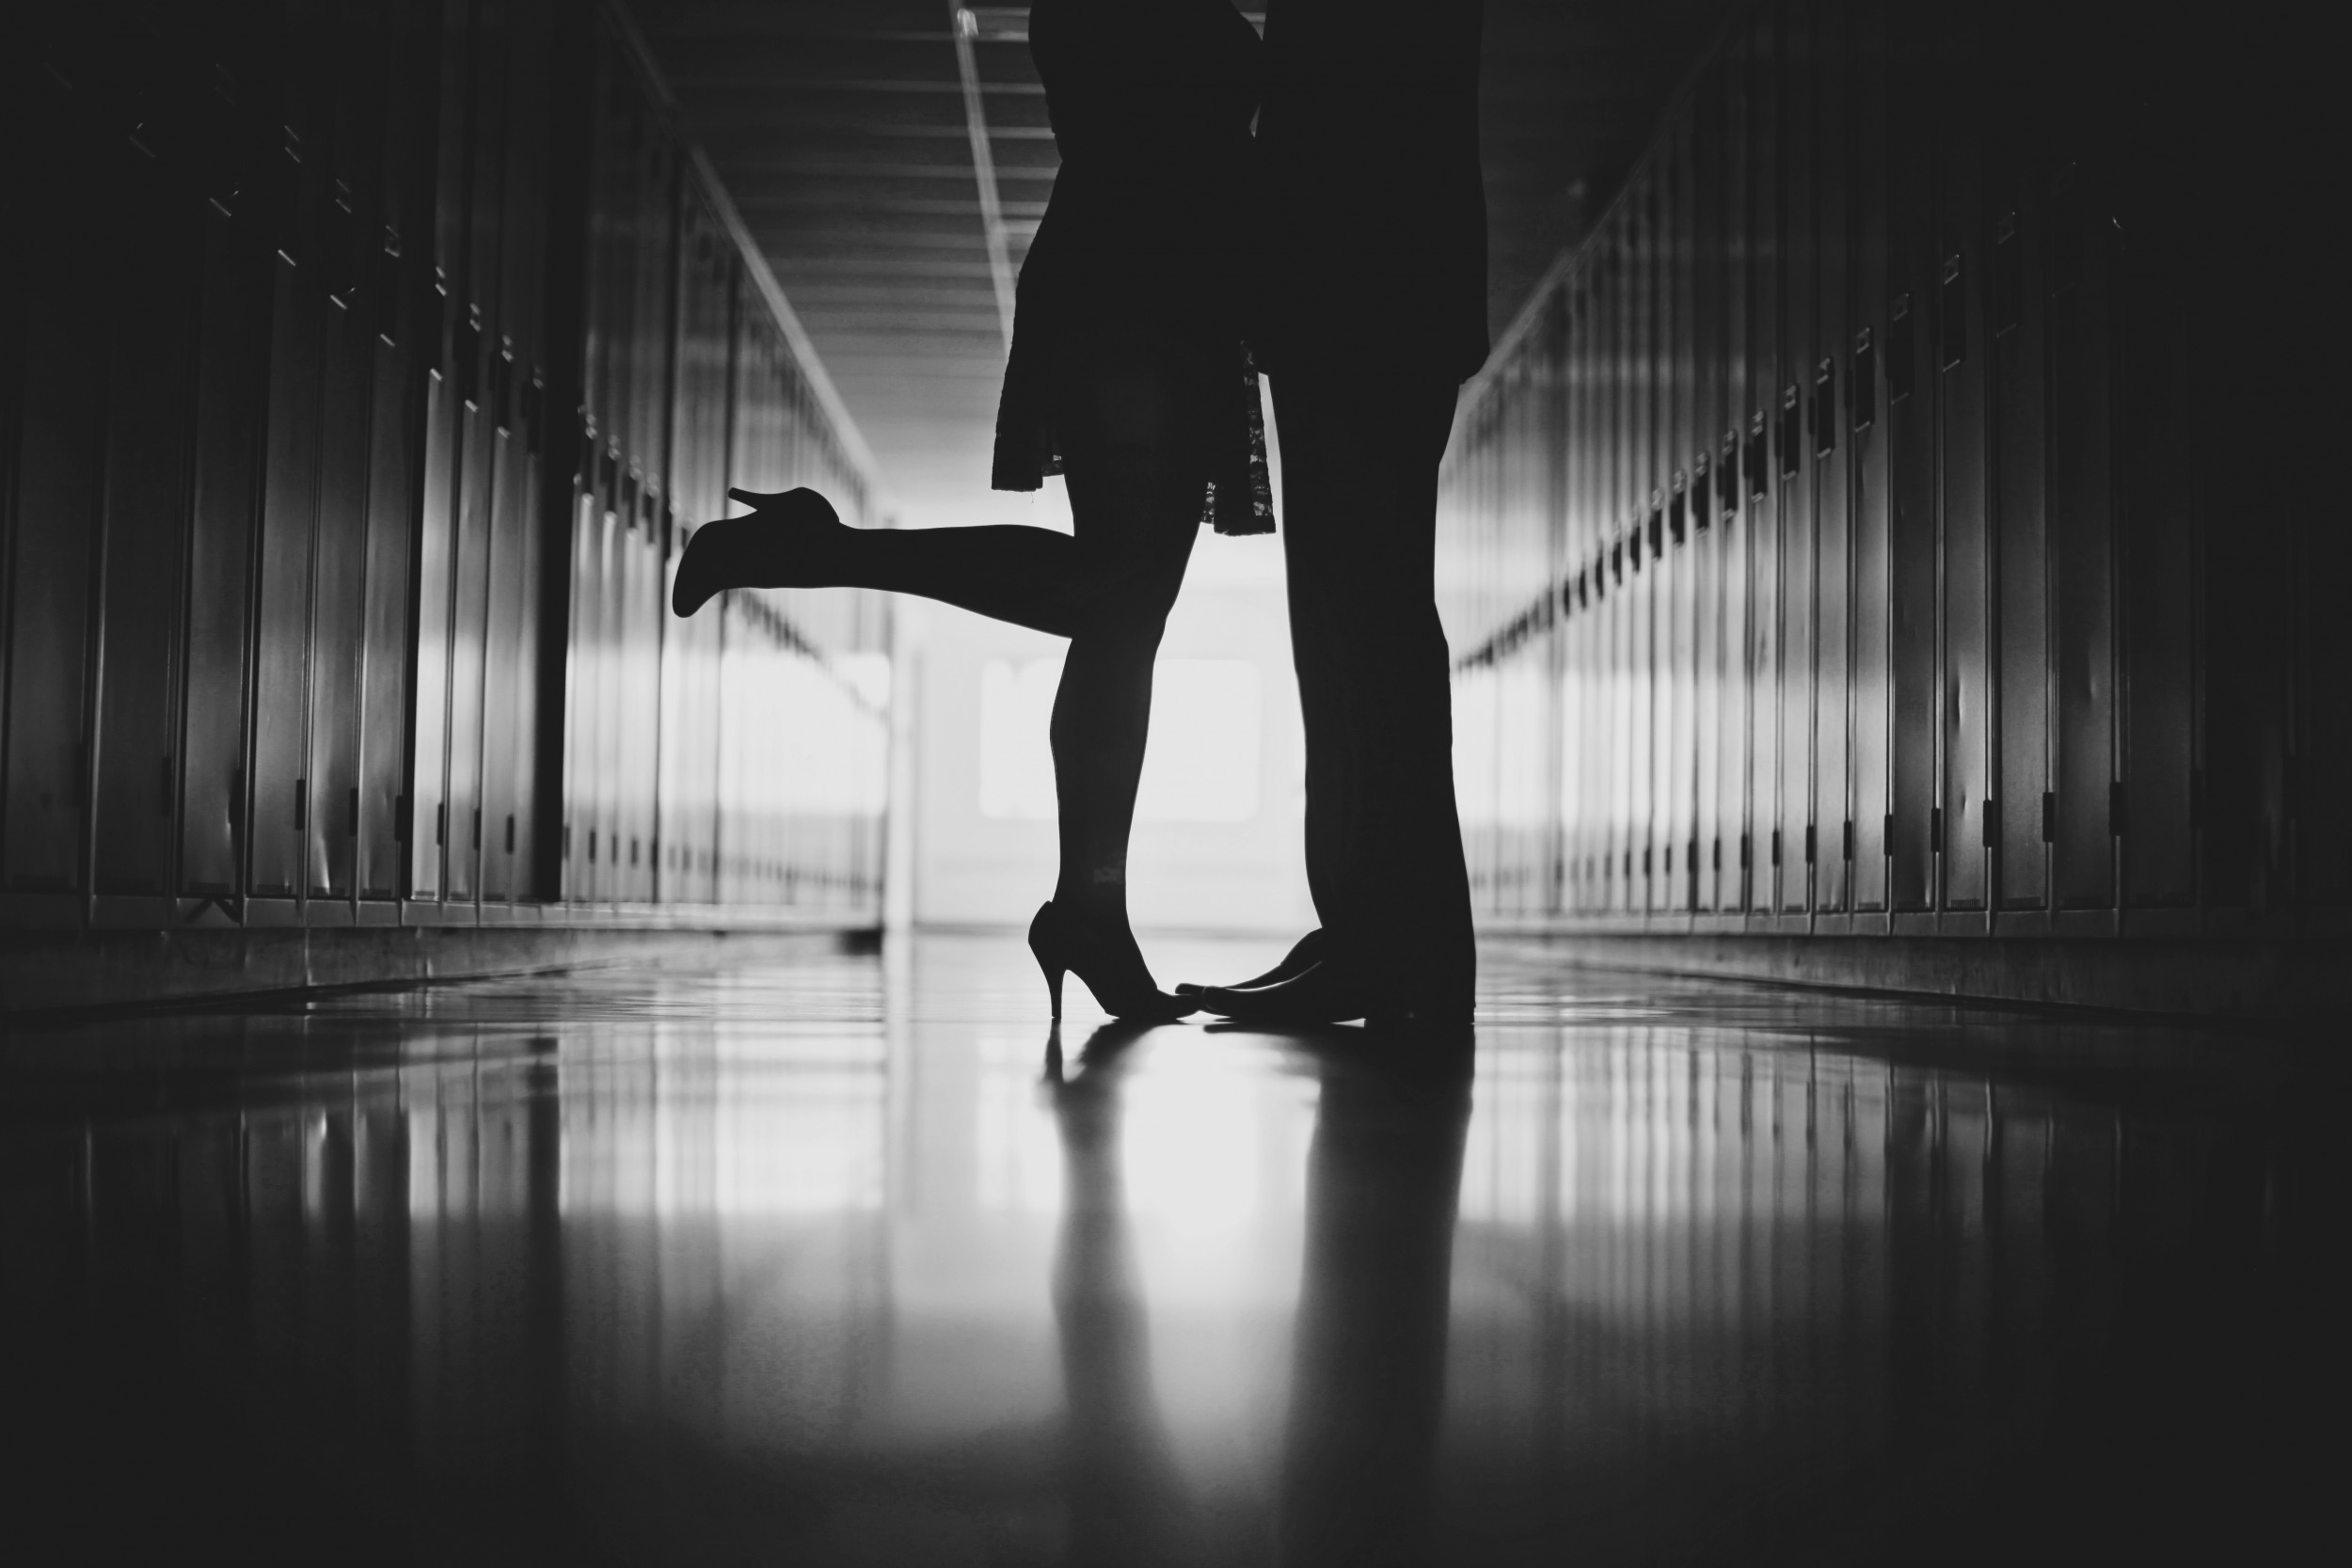 Www Sexvidoe - Video Shows Students Having Sex in Maryland Classroom, School and Police  Investigate